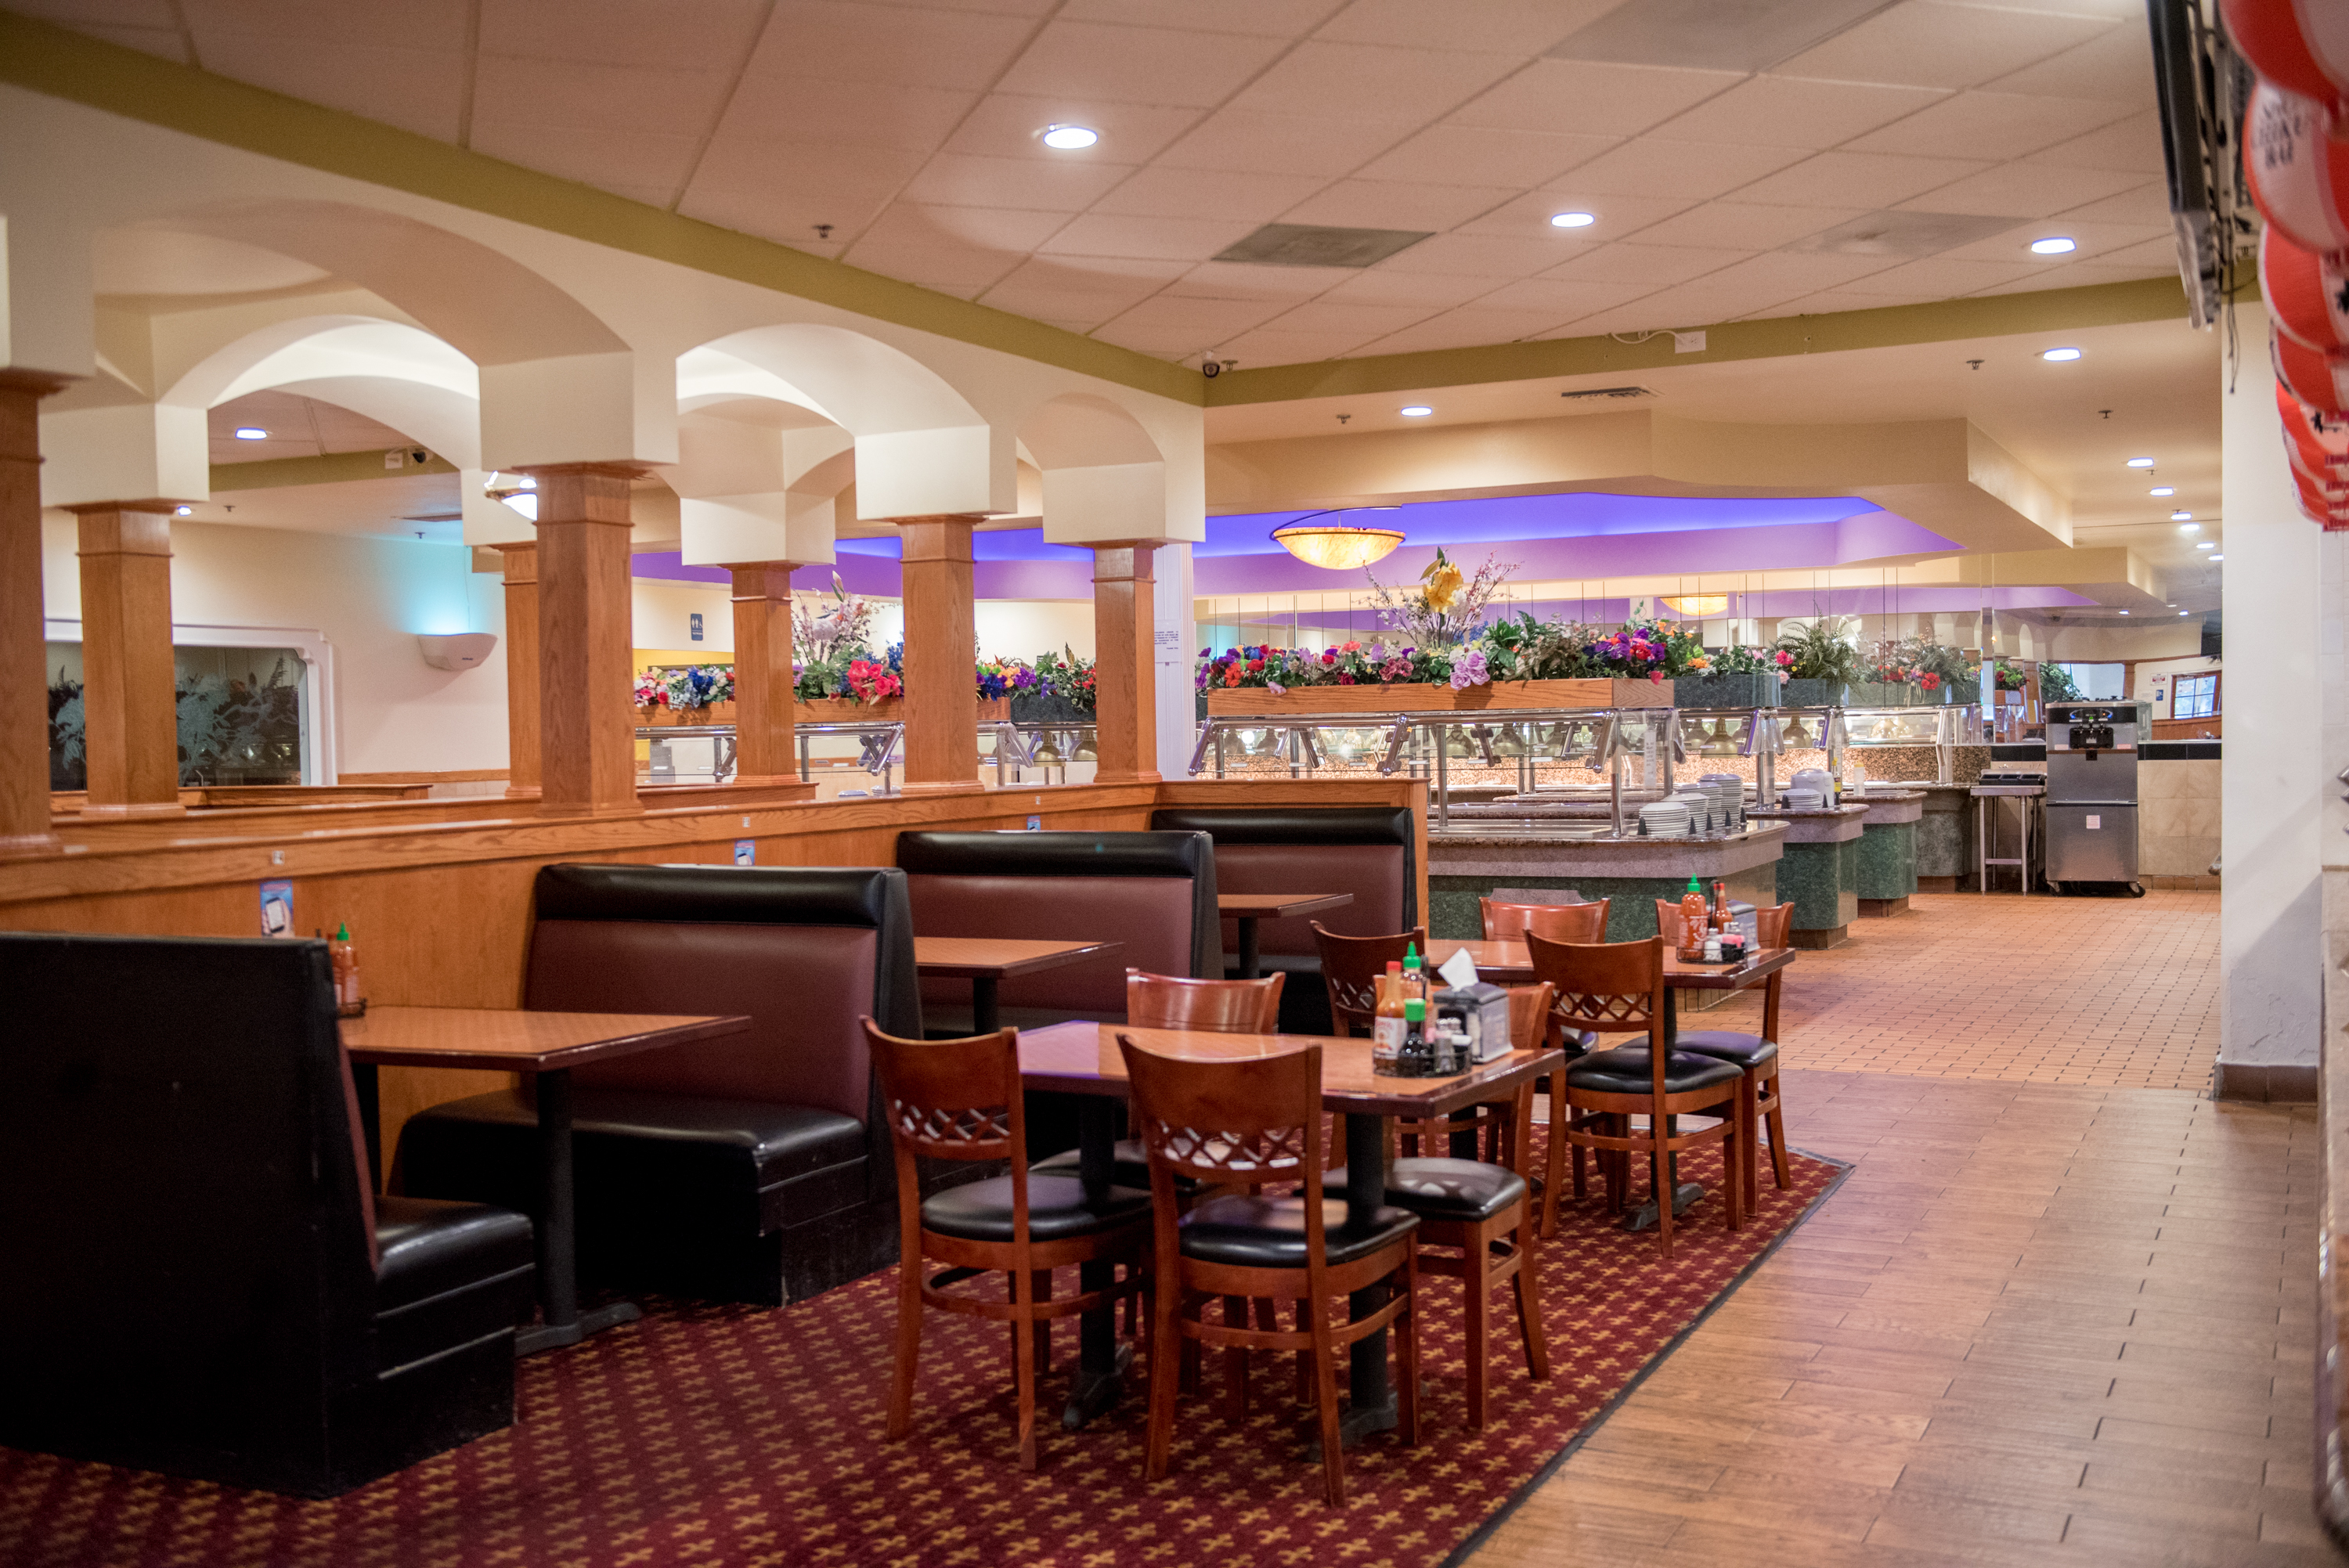 Sapporo Seafood Buffet in Corona, CA | Whitepages